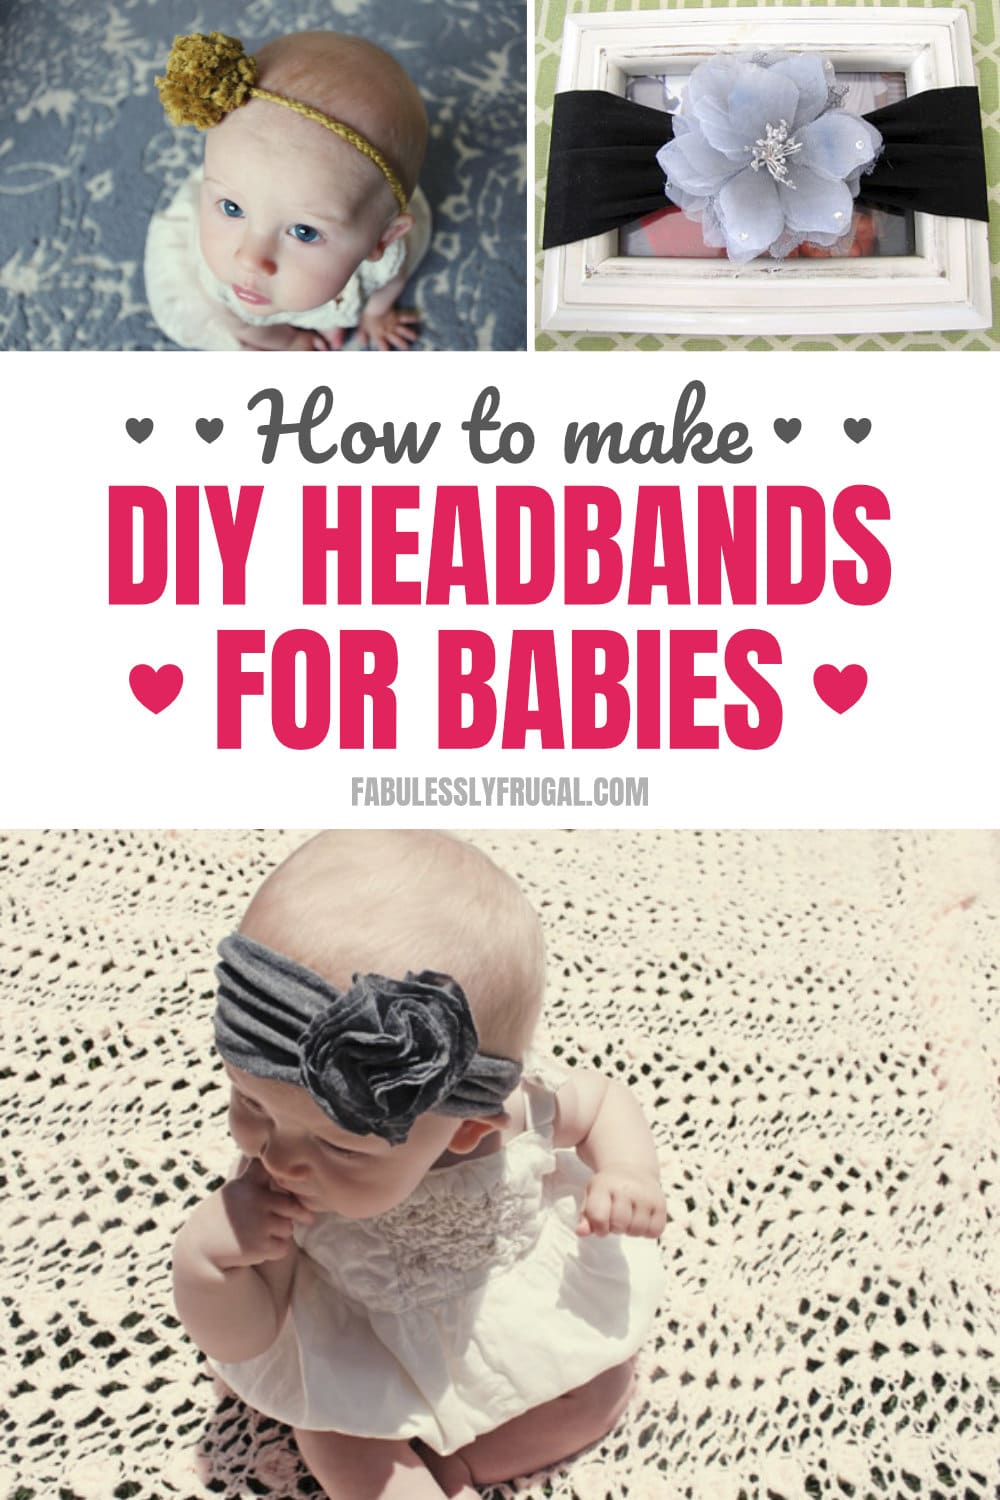 How to make headbands for babies